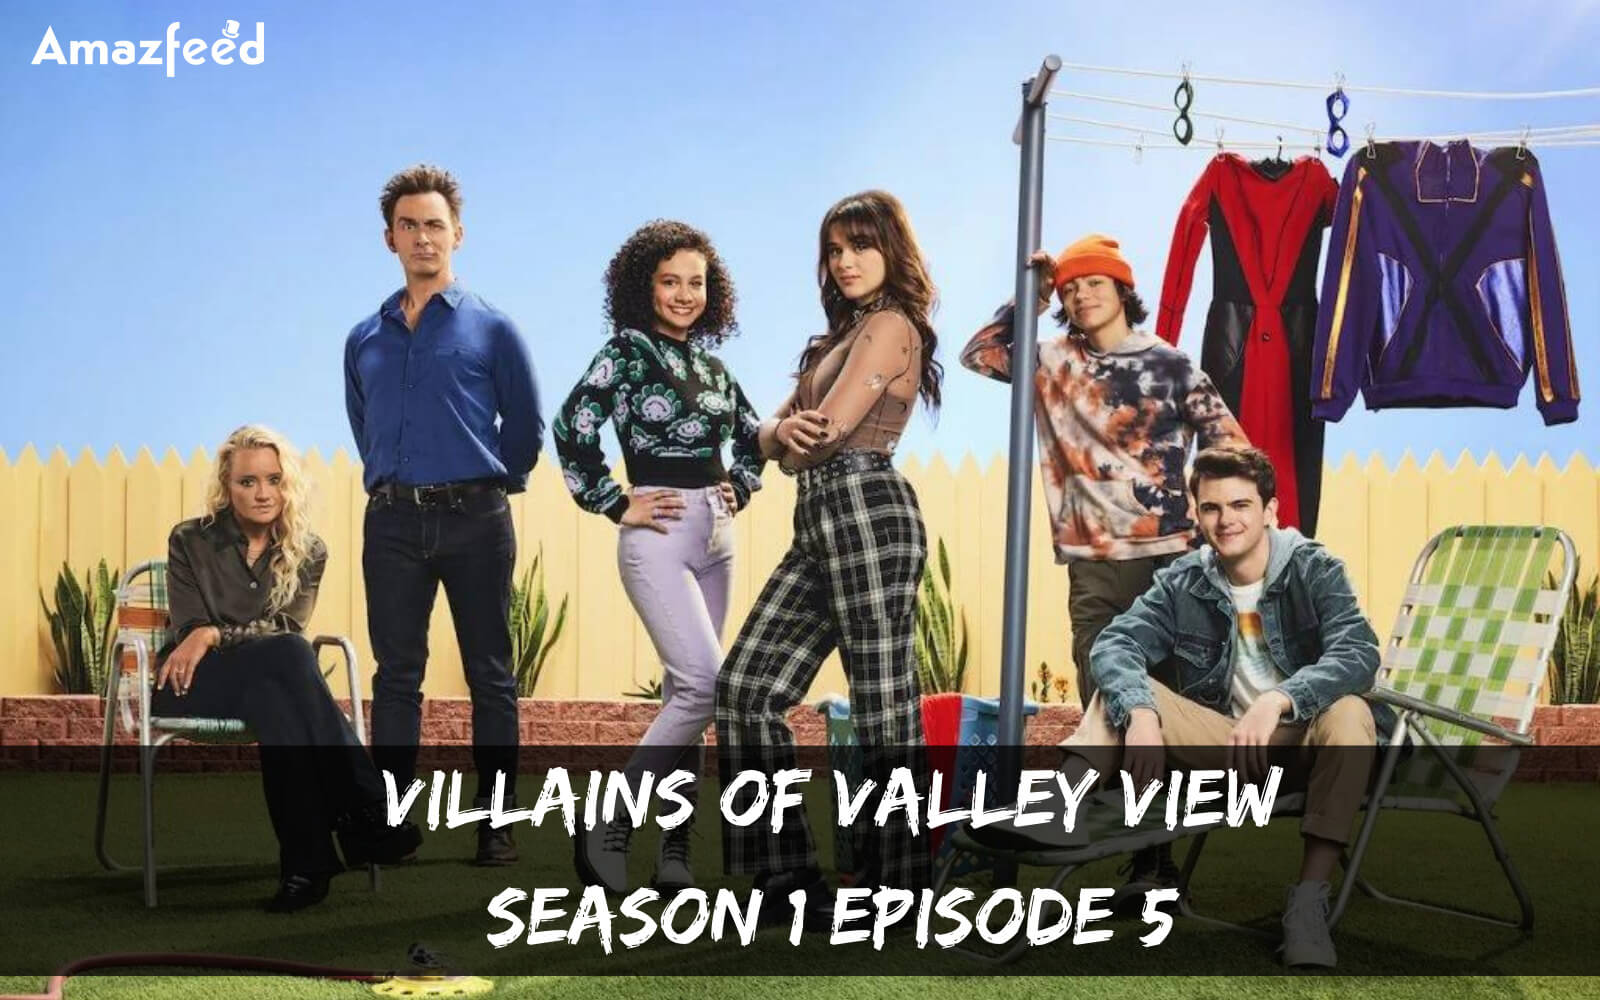 Villains Of Valley View Season 1 Episode 5 release date